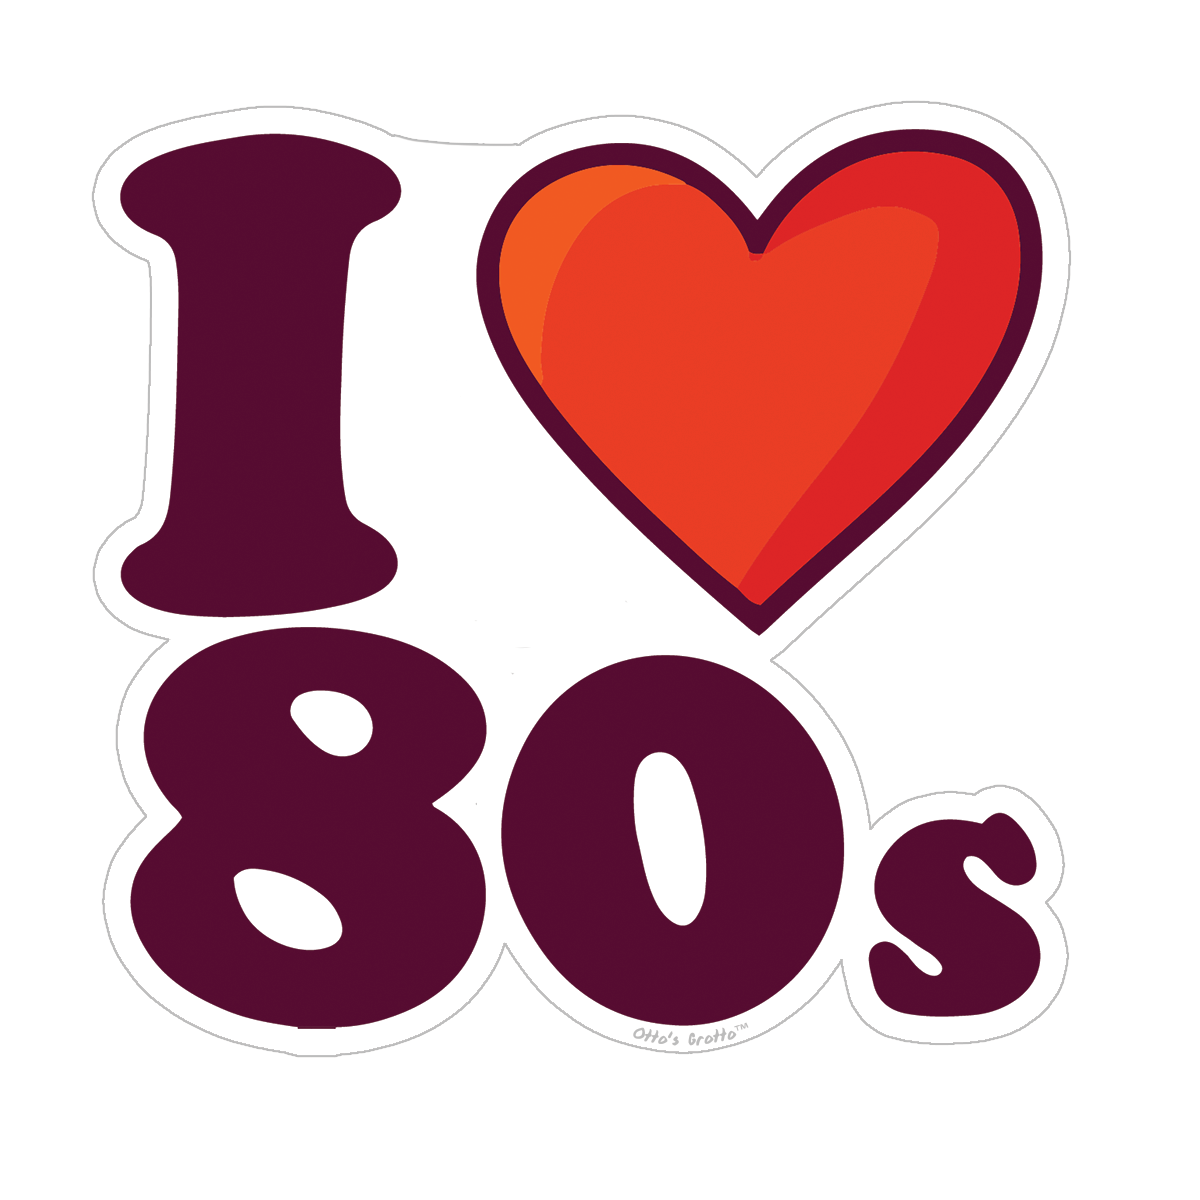 I Love The Eighties Sticker Love The 80s again with this Throwback Sticker! 80s Party Decor